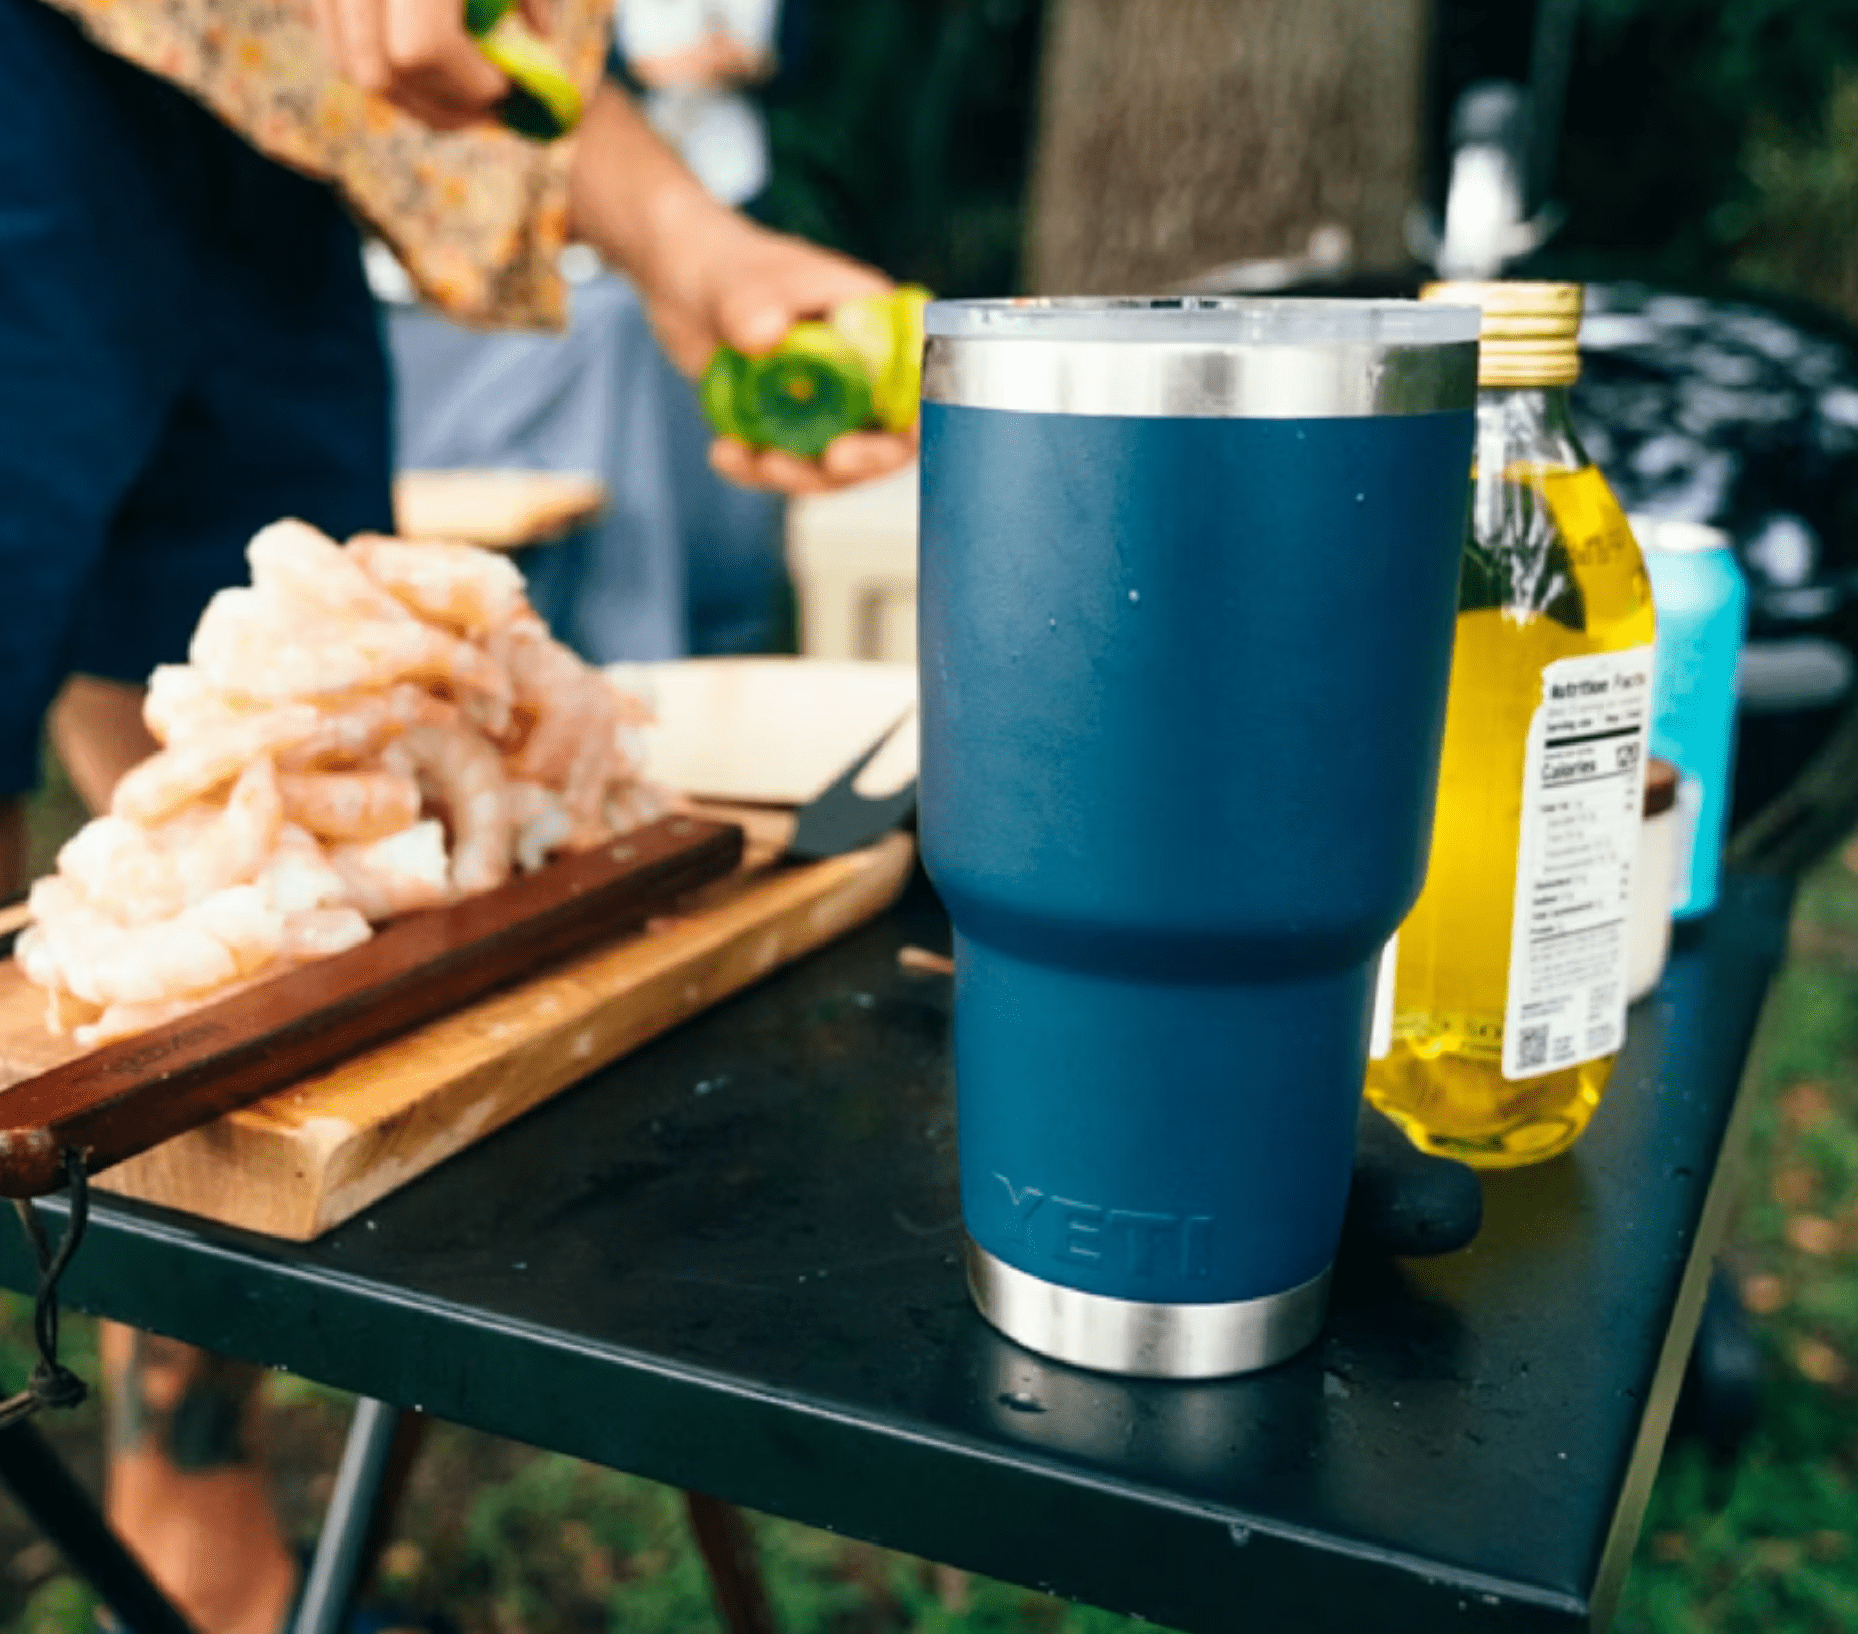 Yeti Rambler review: Does it live up to the hype?